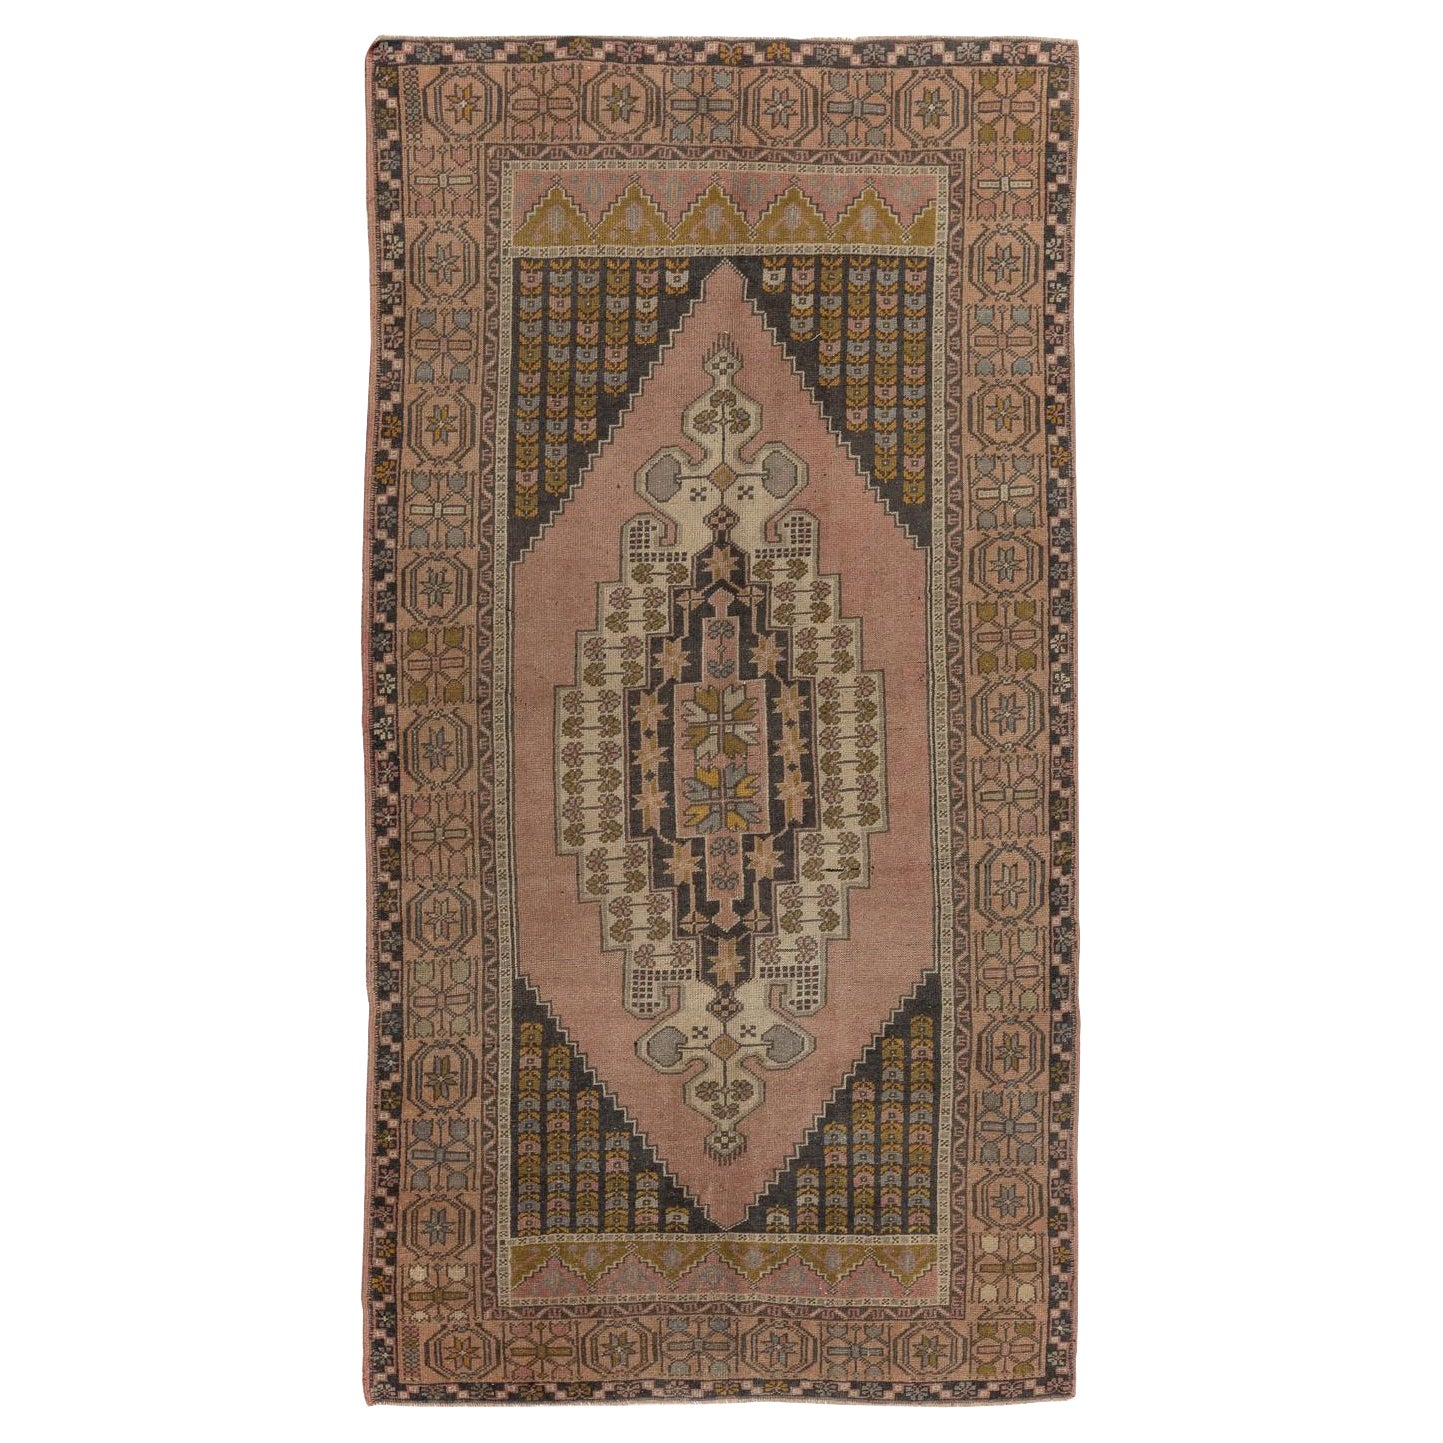 4.2x8 ft Hand Knotted Vintage Turkish Rug. 100% Wool. Traditional Village Carpet For Sale